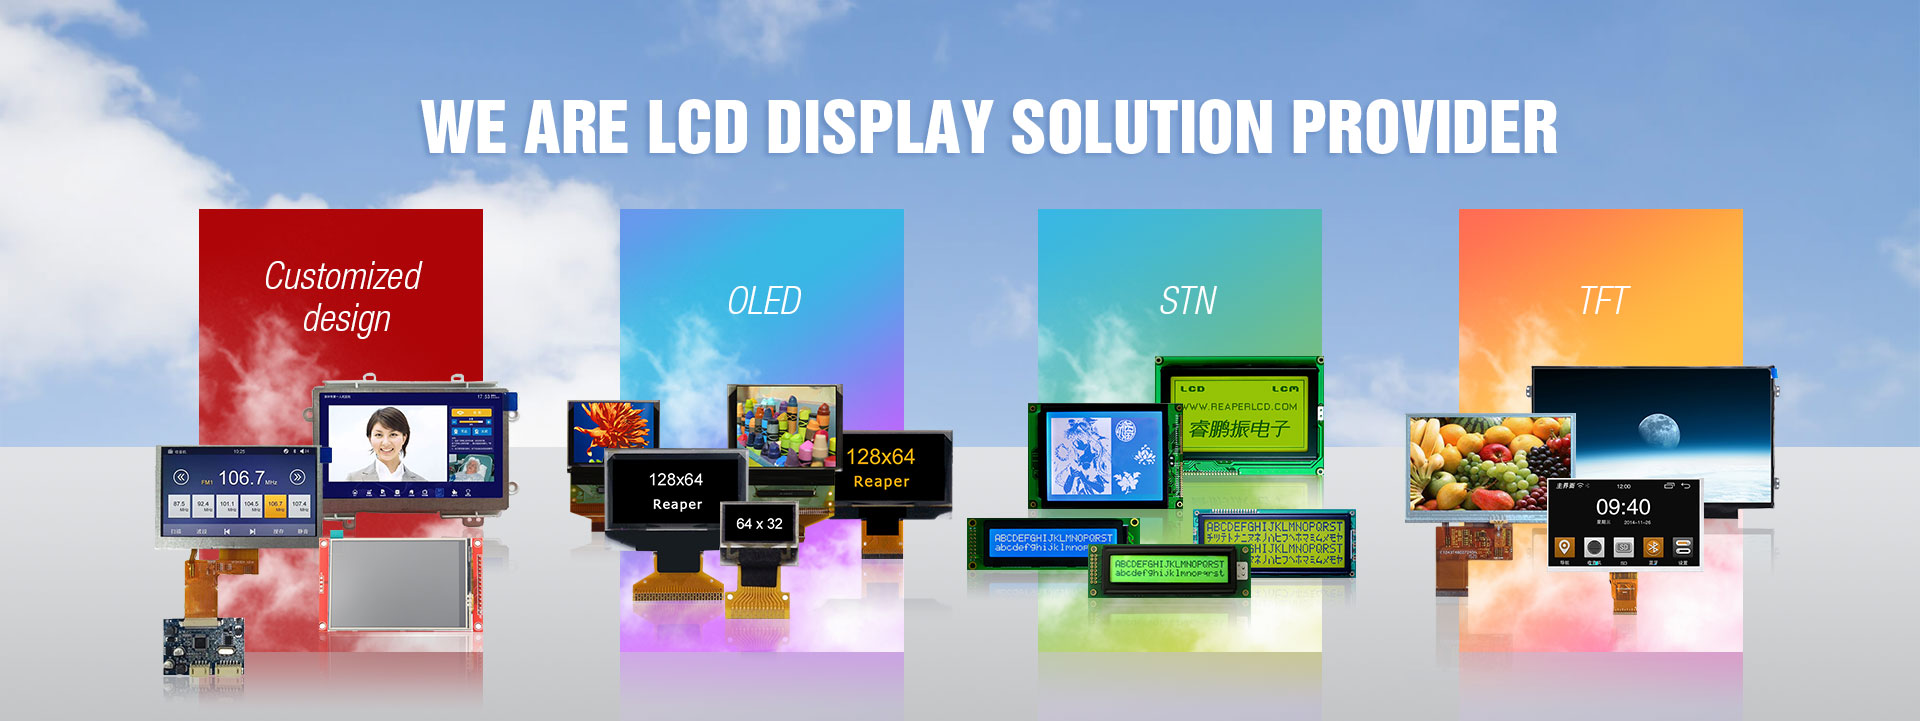 We are lcd display solution provider